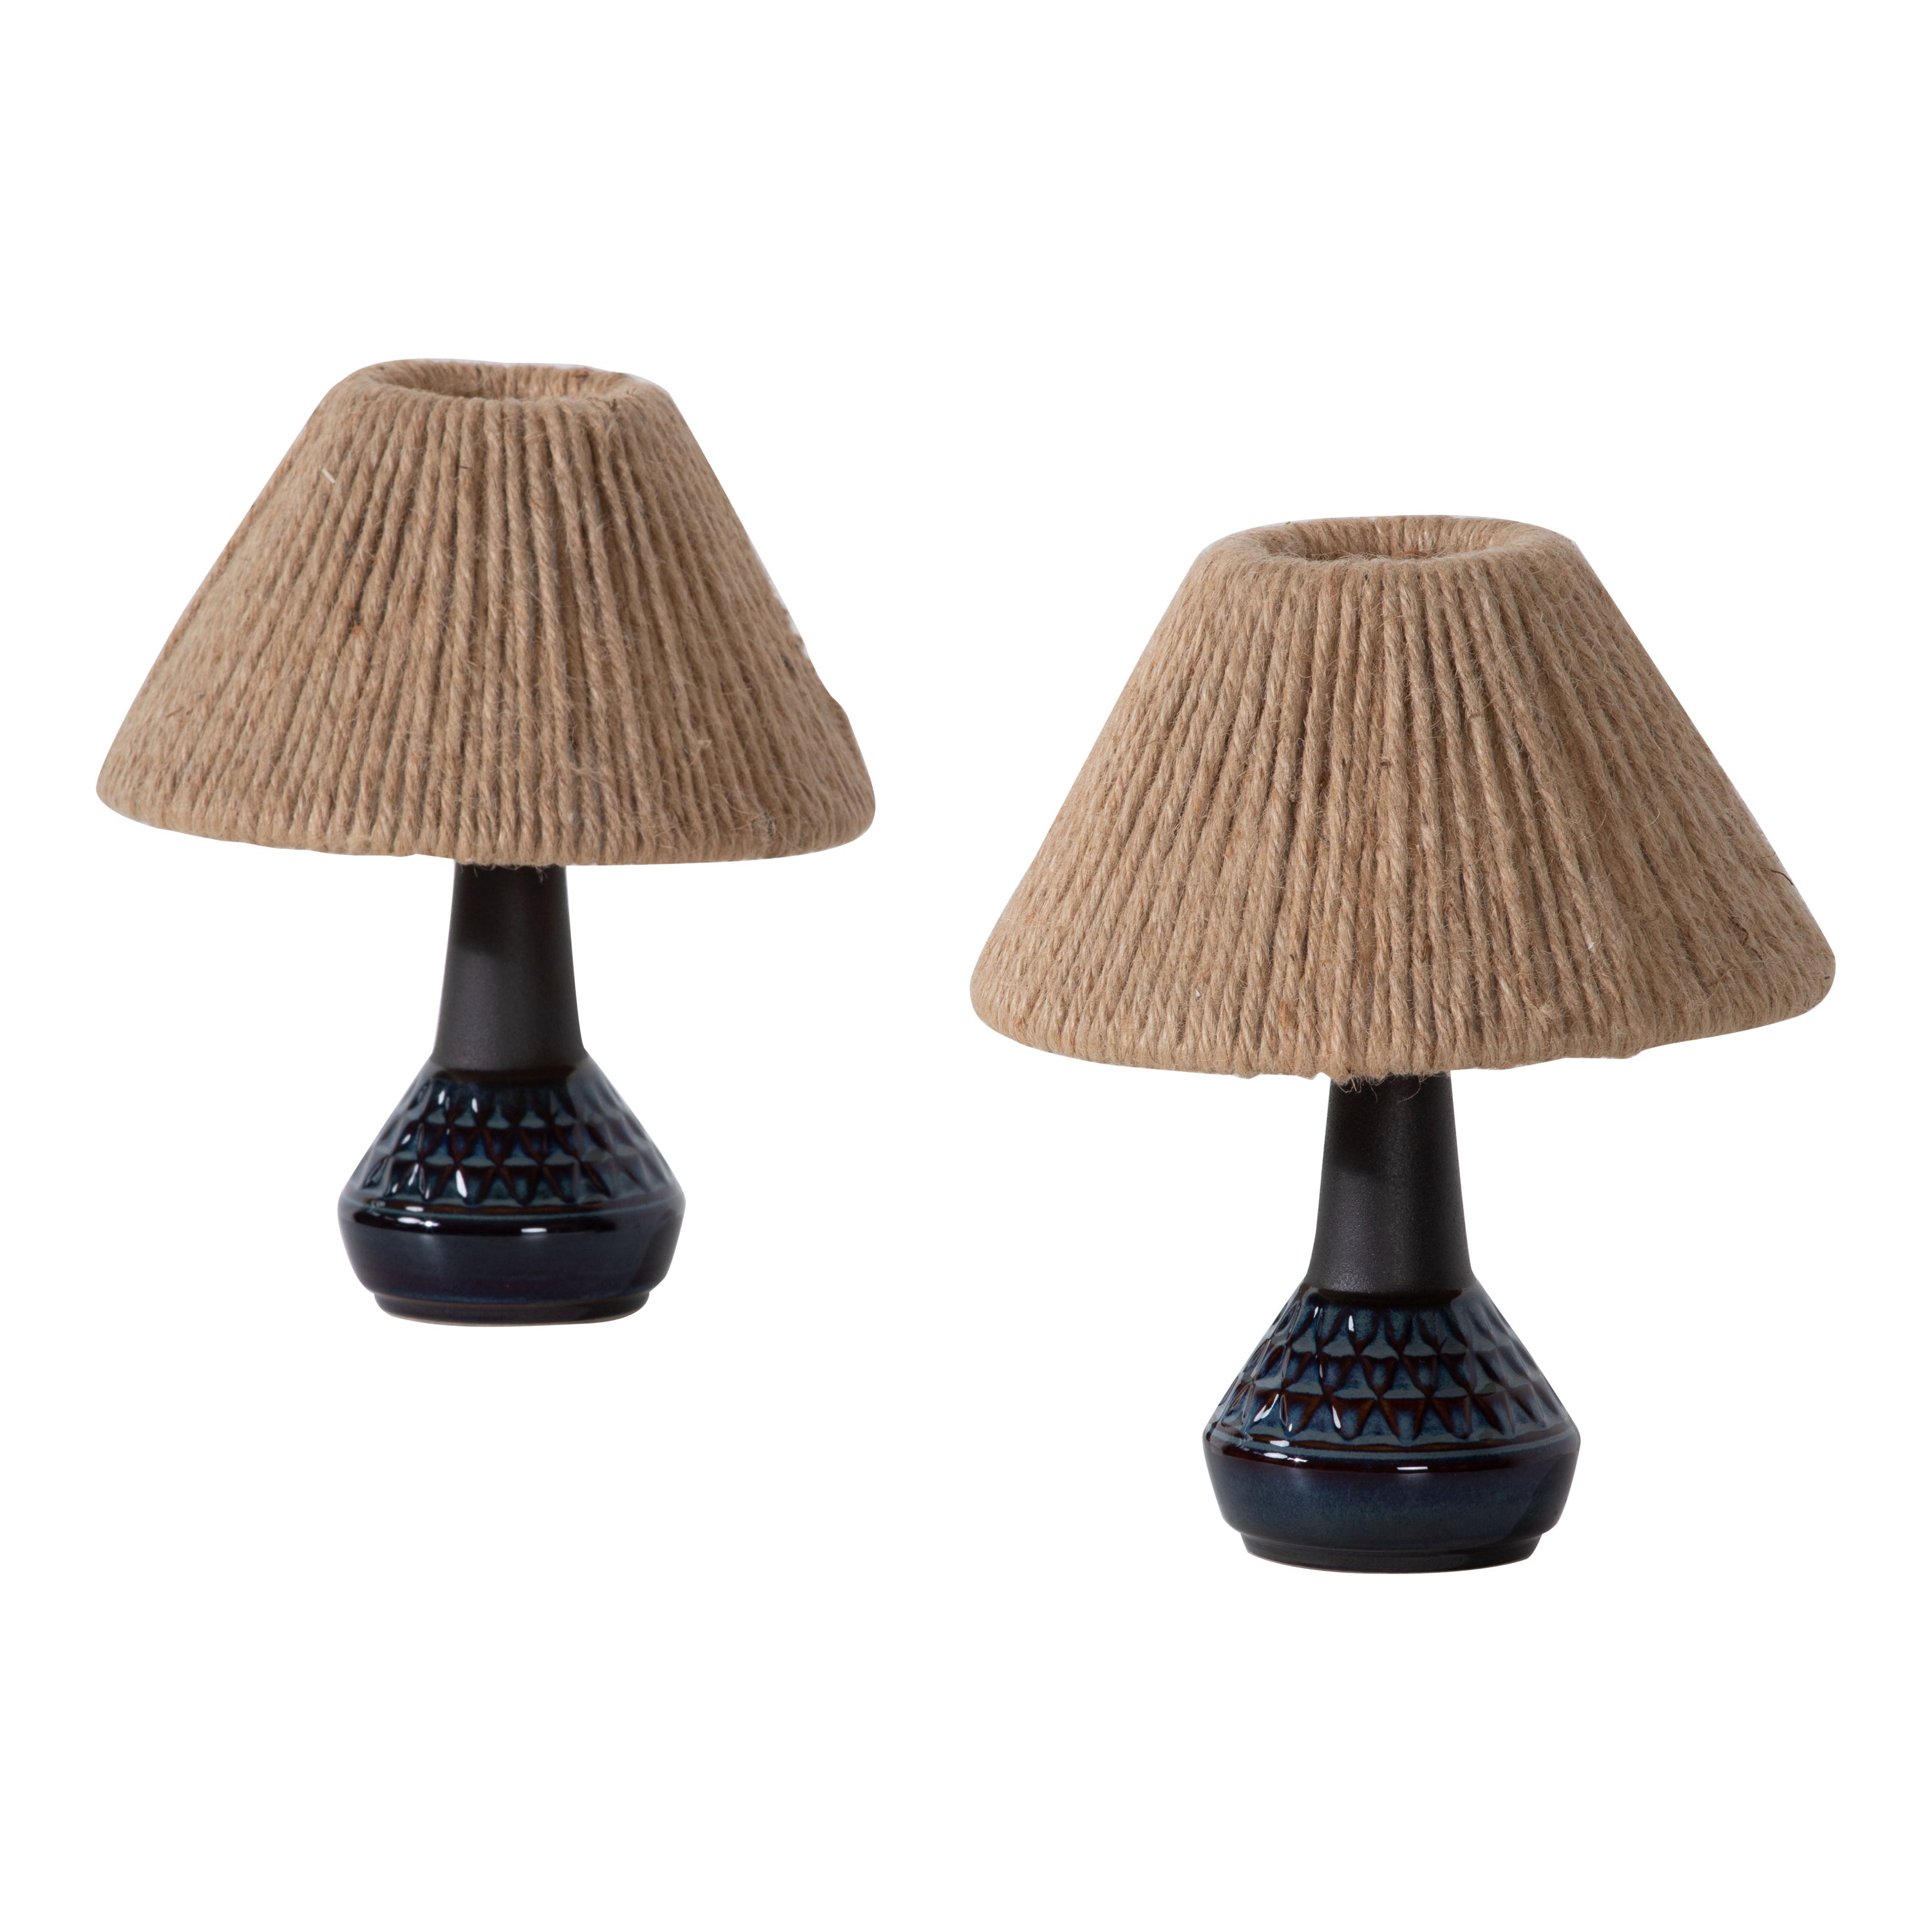 Pair of Vintage Søholm Table Lamps, Designed by Einar Johansen